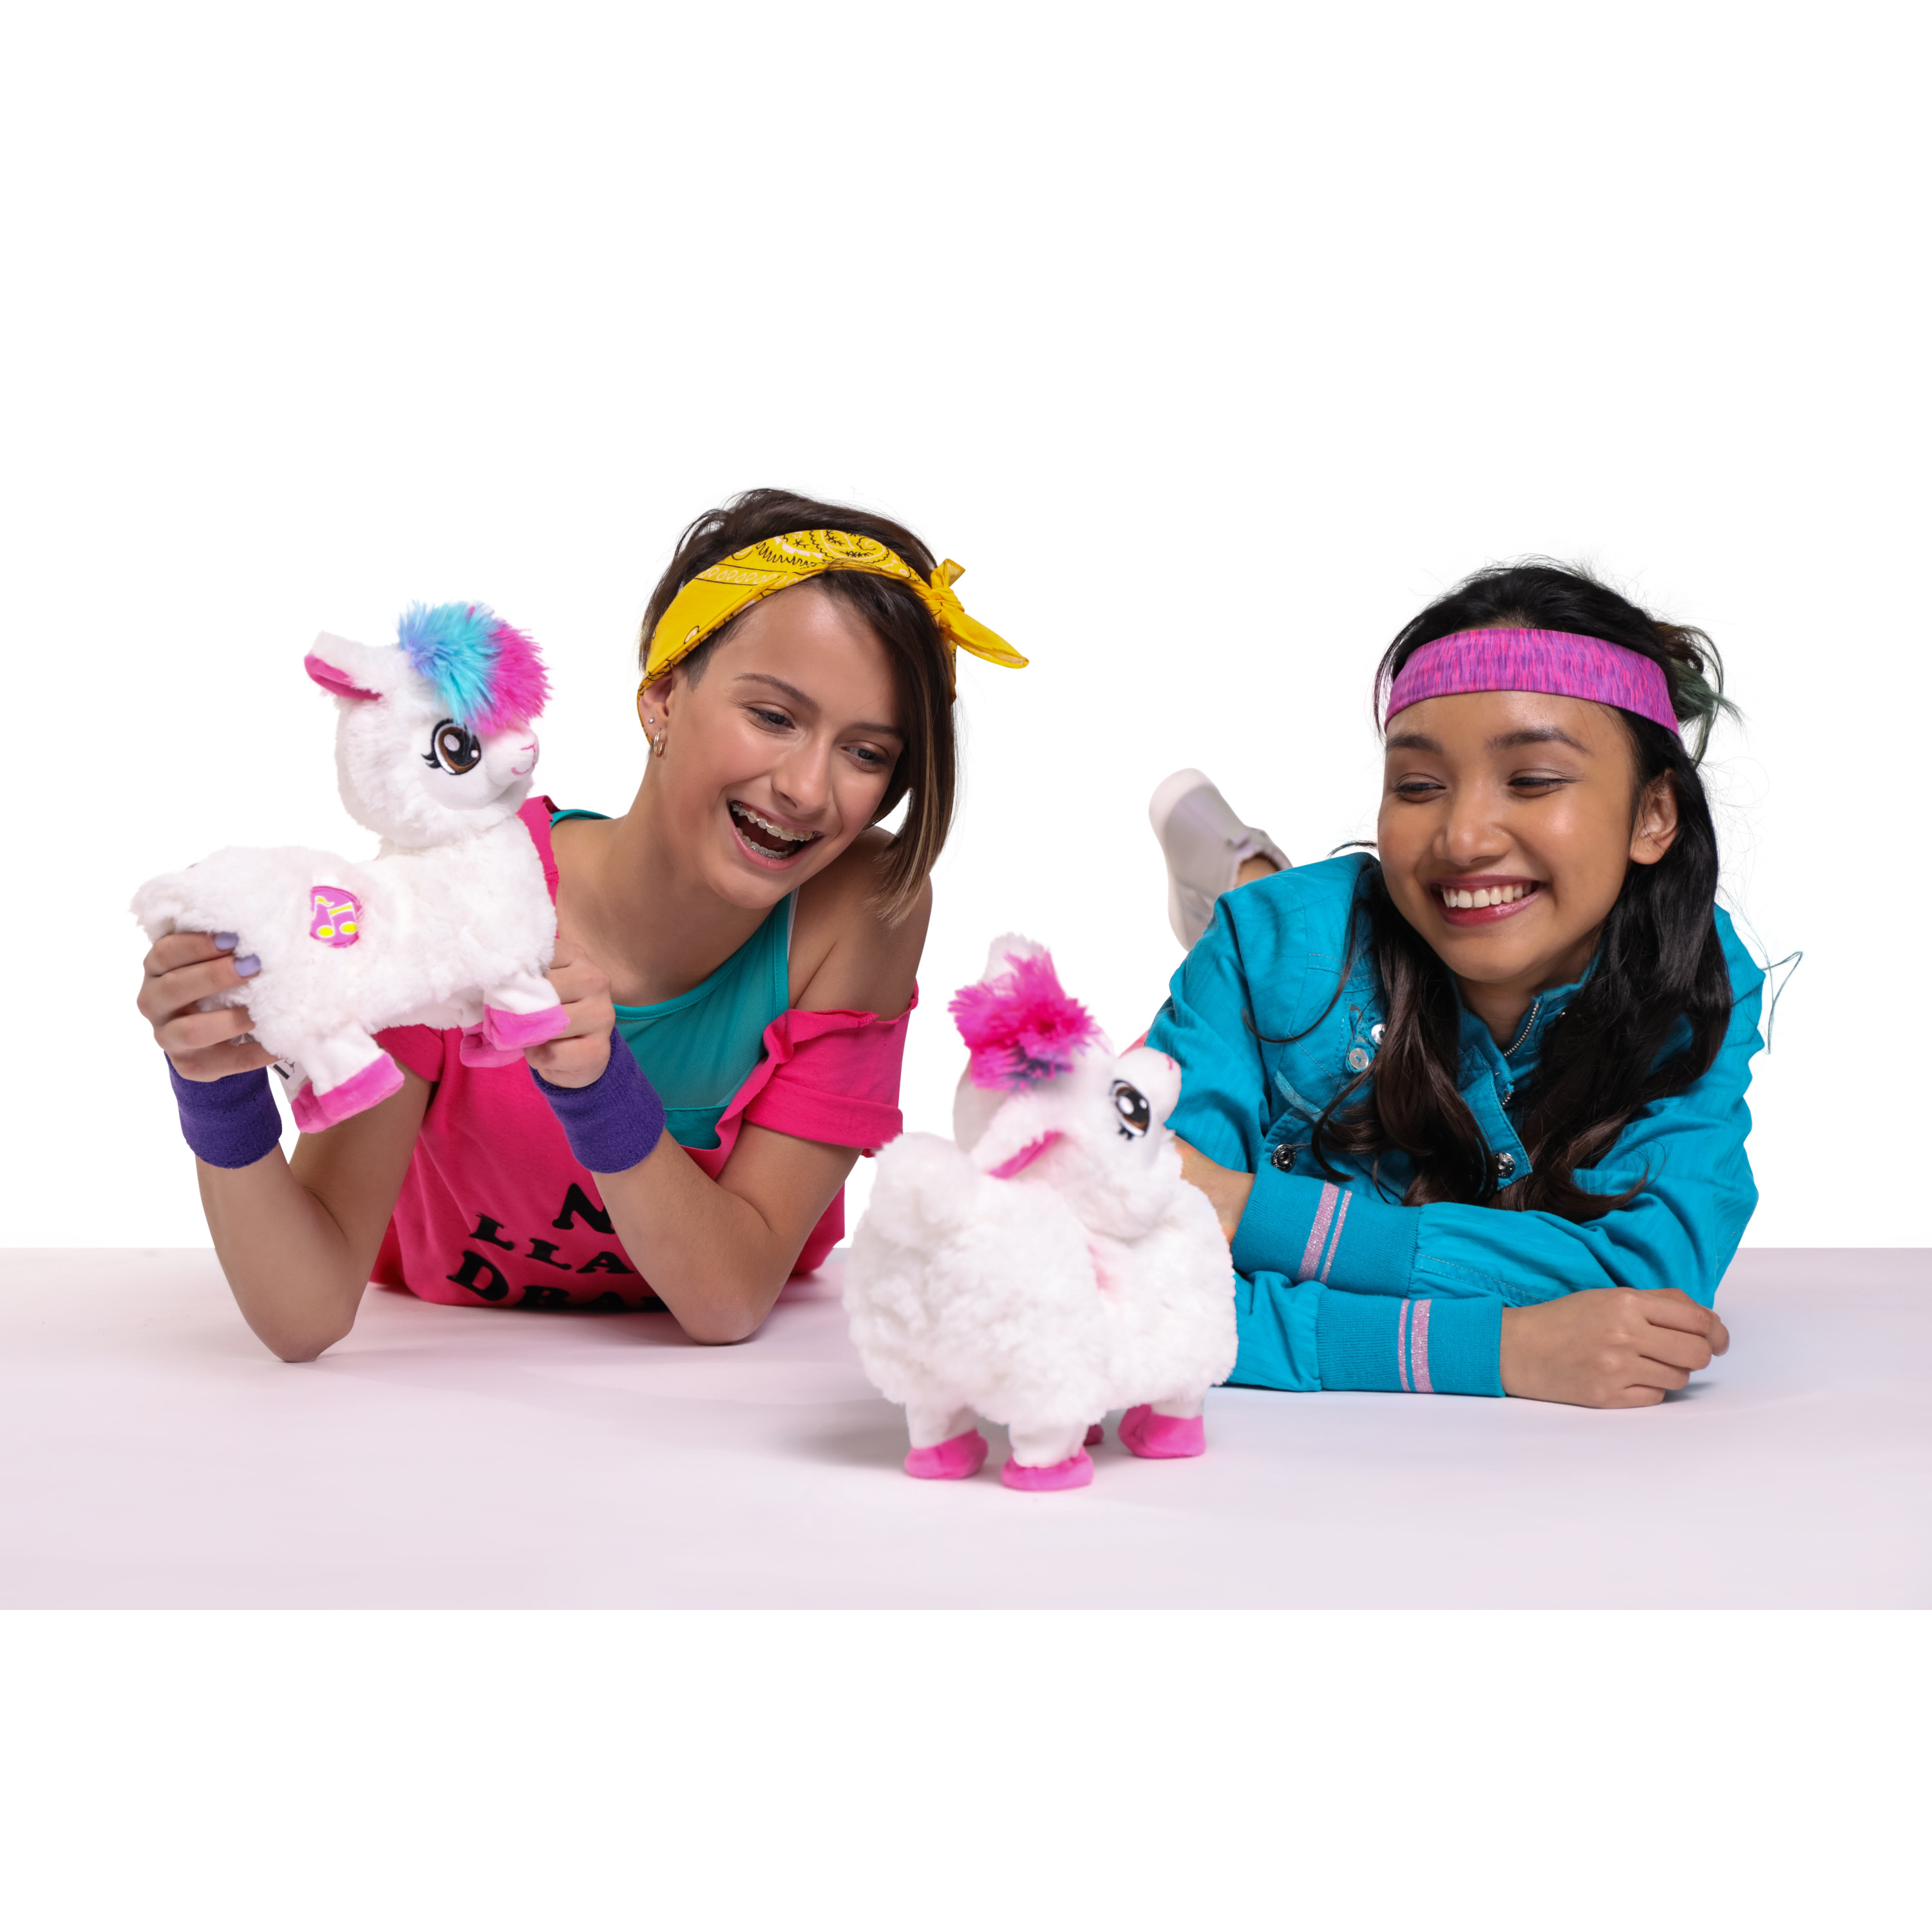 Pets Alive Boppi the Booty Shakin Llama – Only $19.97!